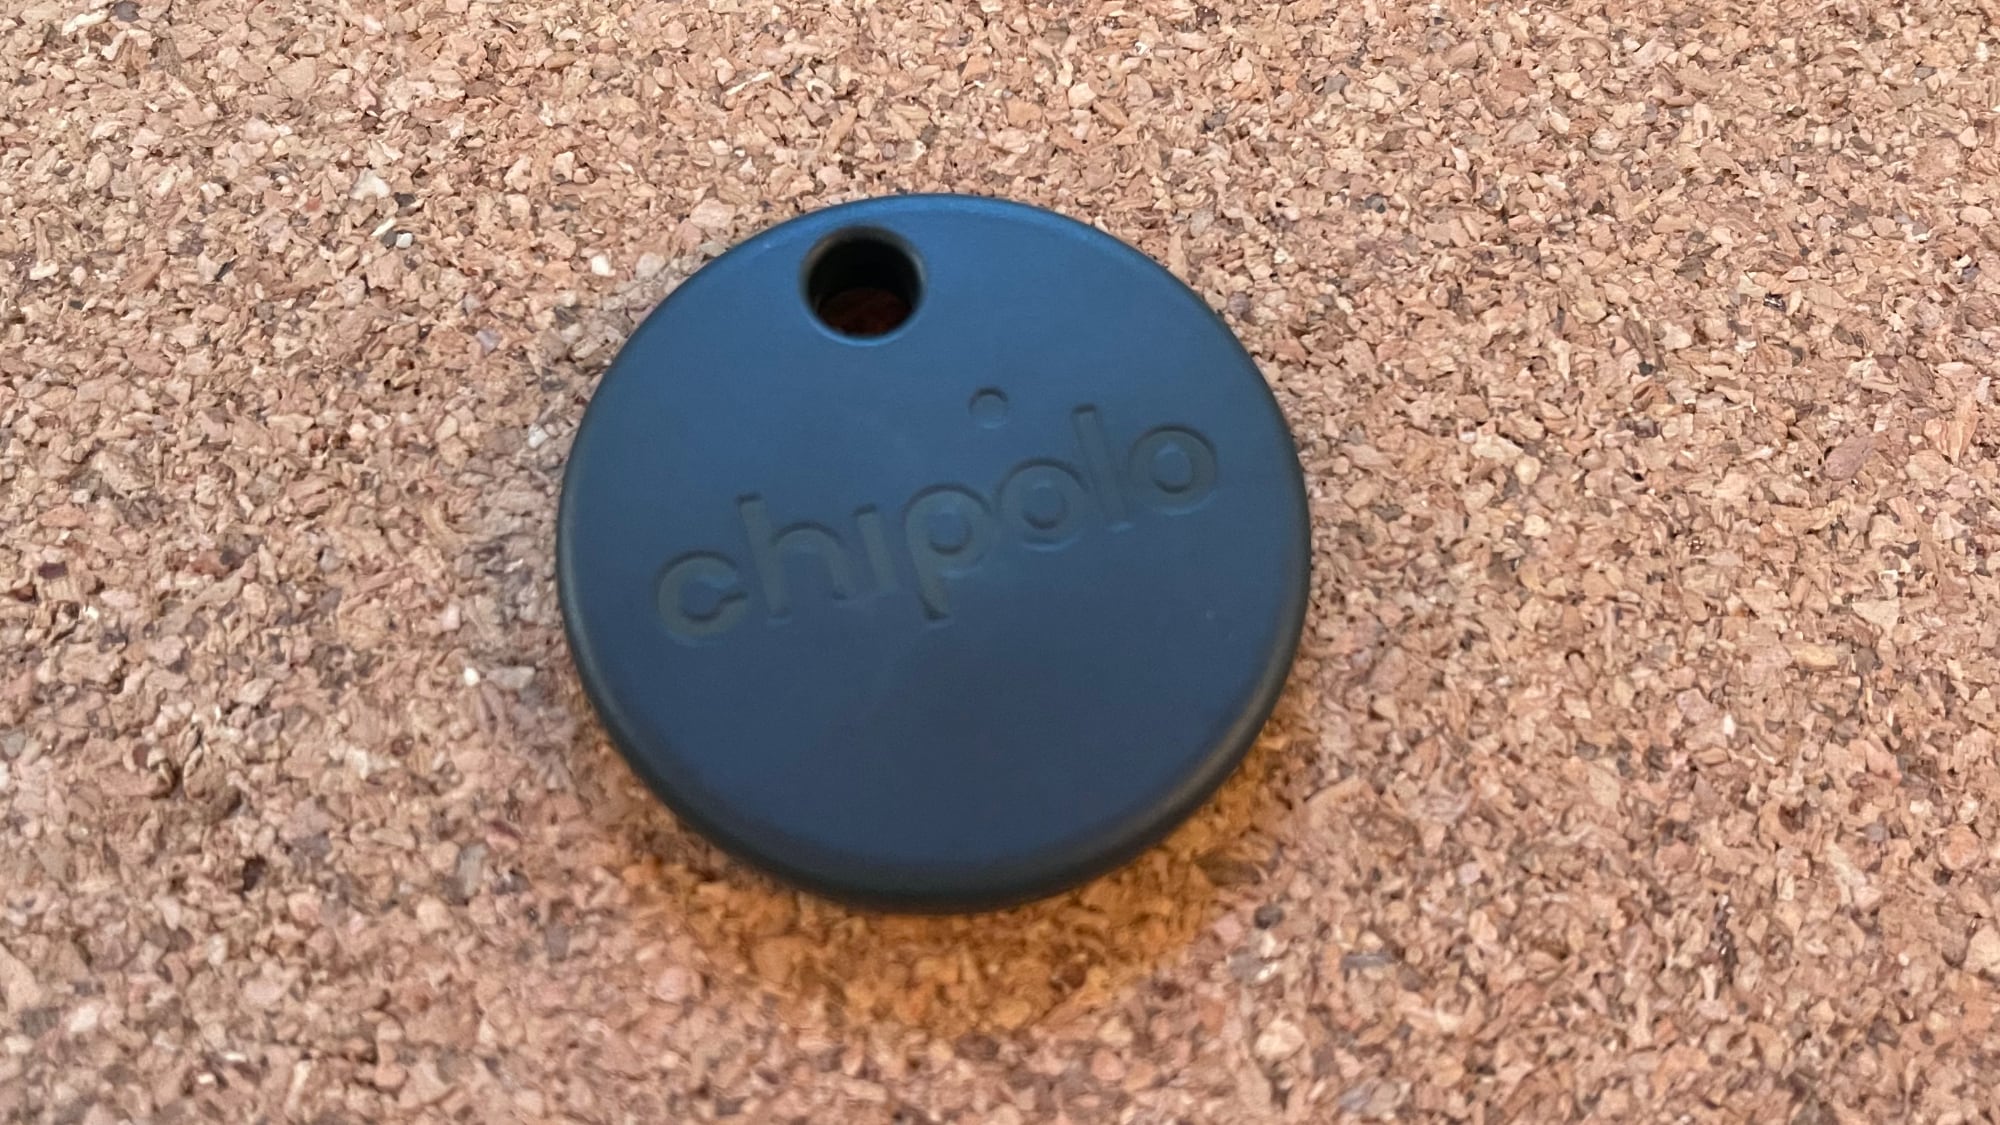 Chipolo ONE Spot! The Alternative to Apple AirTag! Review